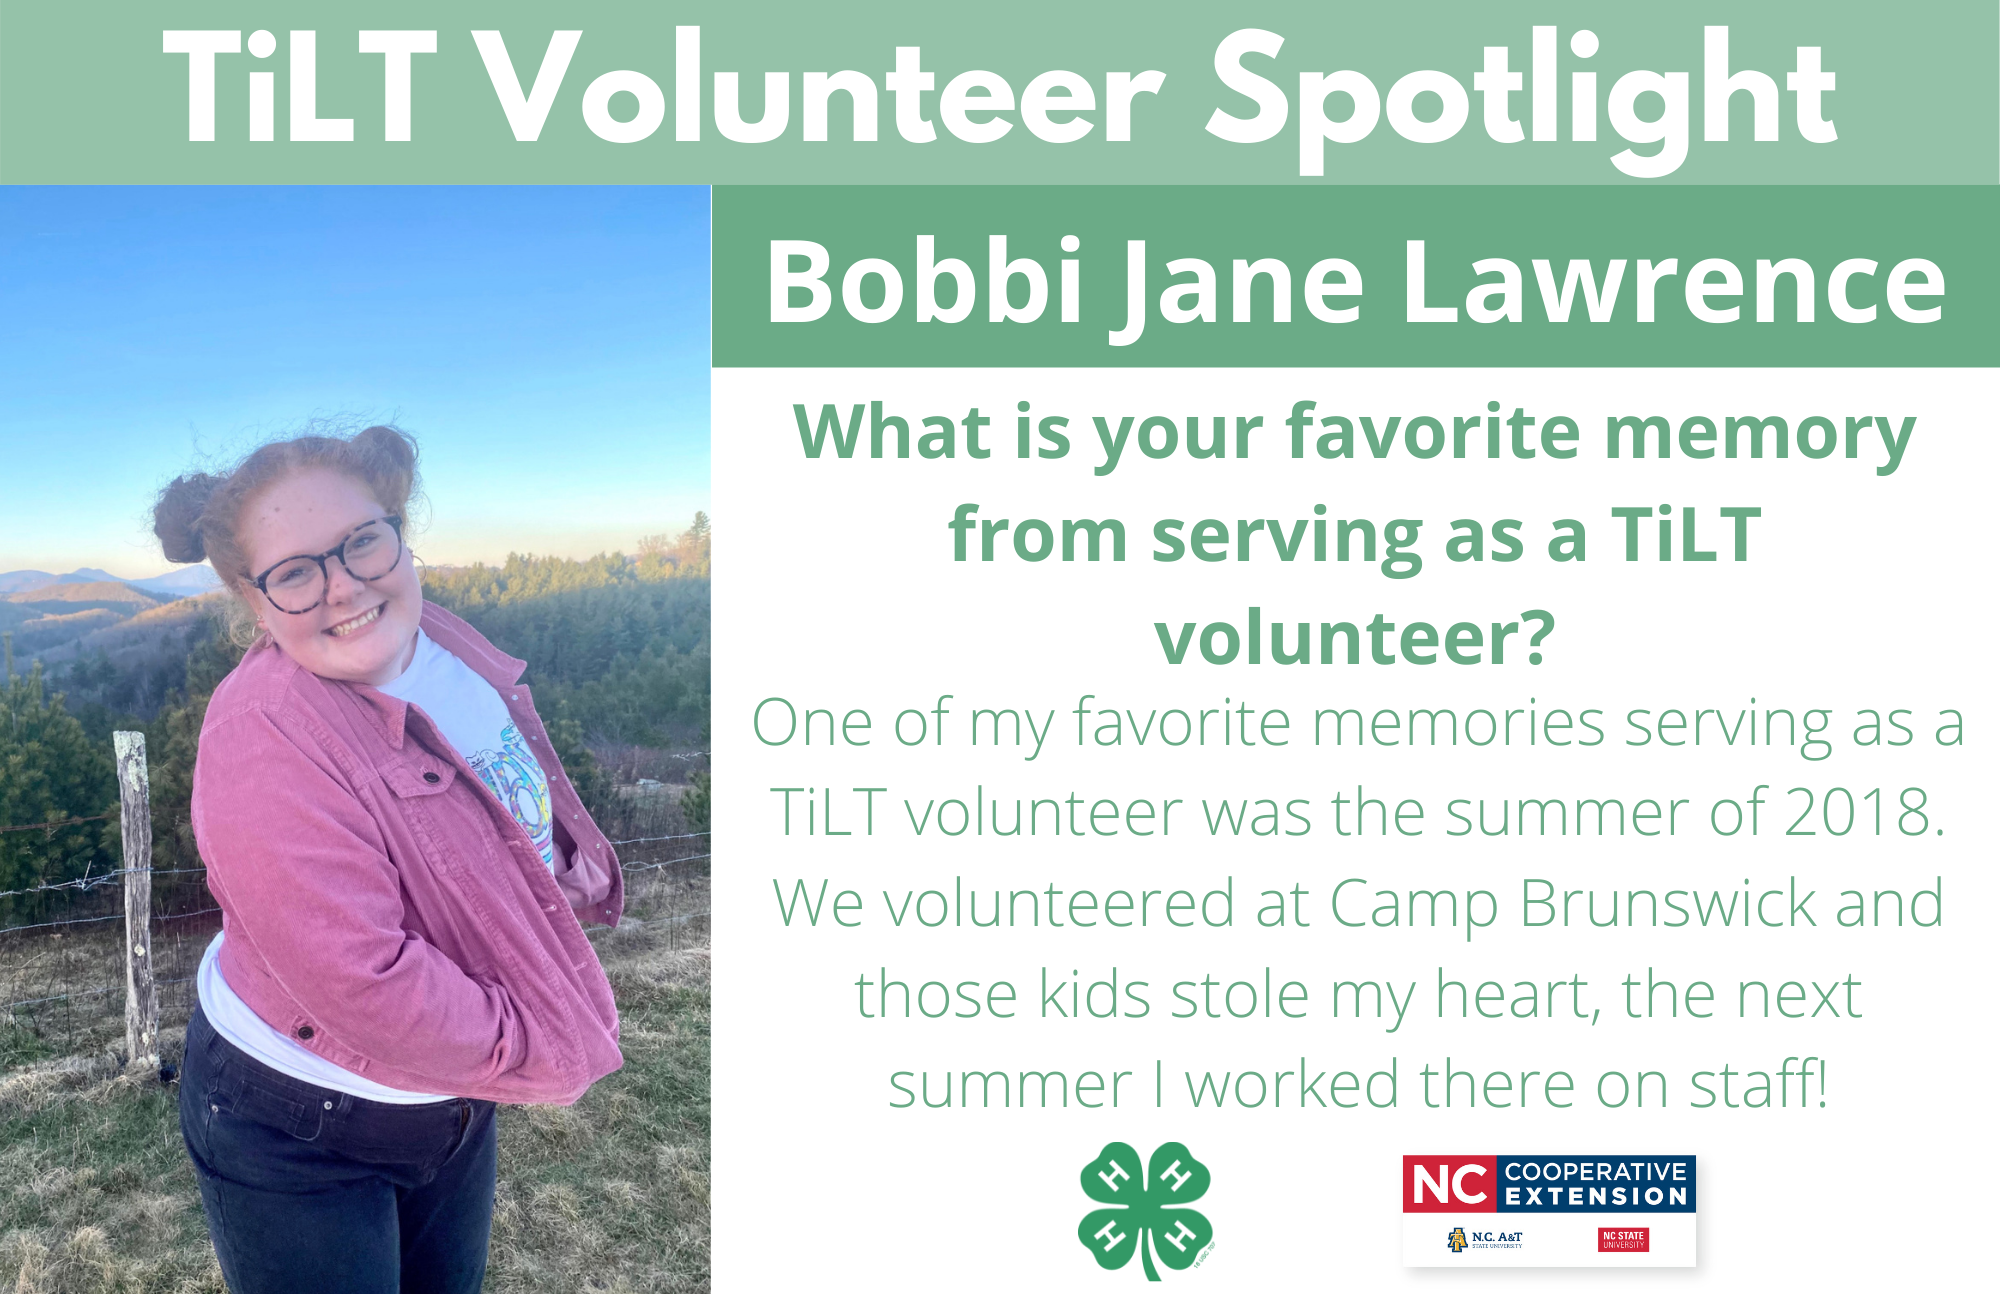 Headshot of Bobbi Jane Lawrence with following text to the right of image. TiLT Volunteer Spotlight. Bobbi Jane Lawrence. What is your favorite memory from serving as a TiLT volunteer? One of my favorite memories serving as a TiLT volunteer was the summer of 2018. We volunteered at Camp Brunswick and those kids stole my heart, the next summer I worked there on staff!